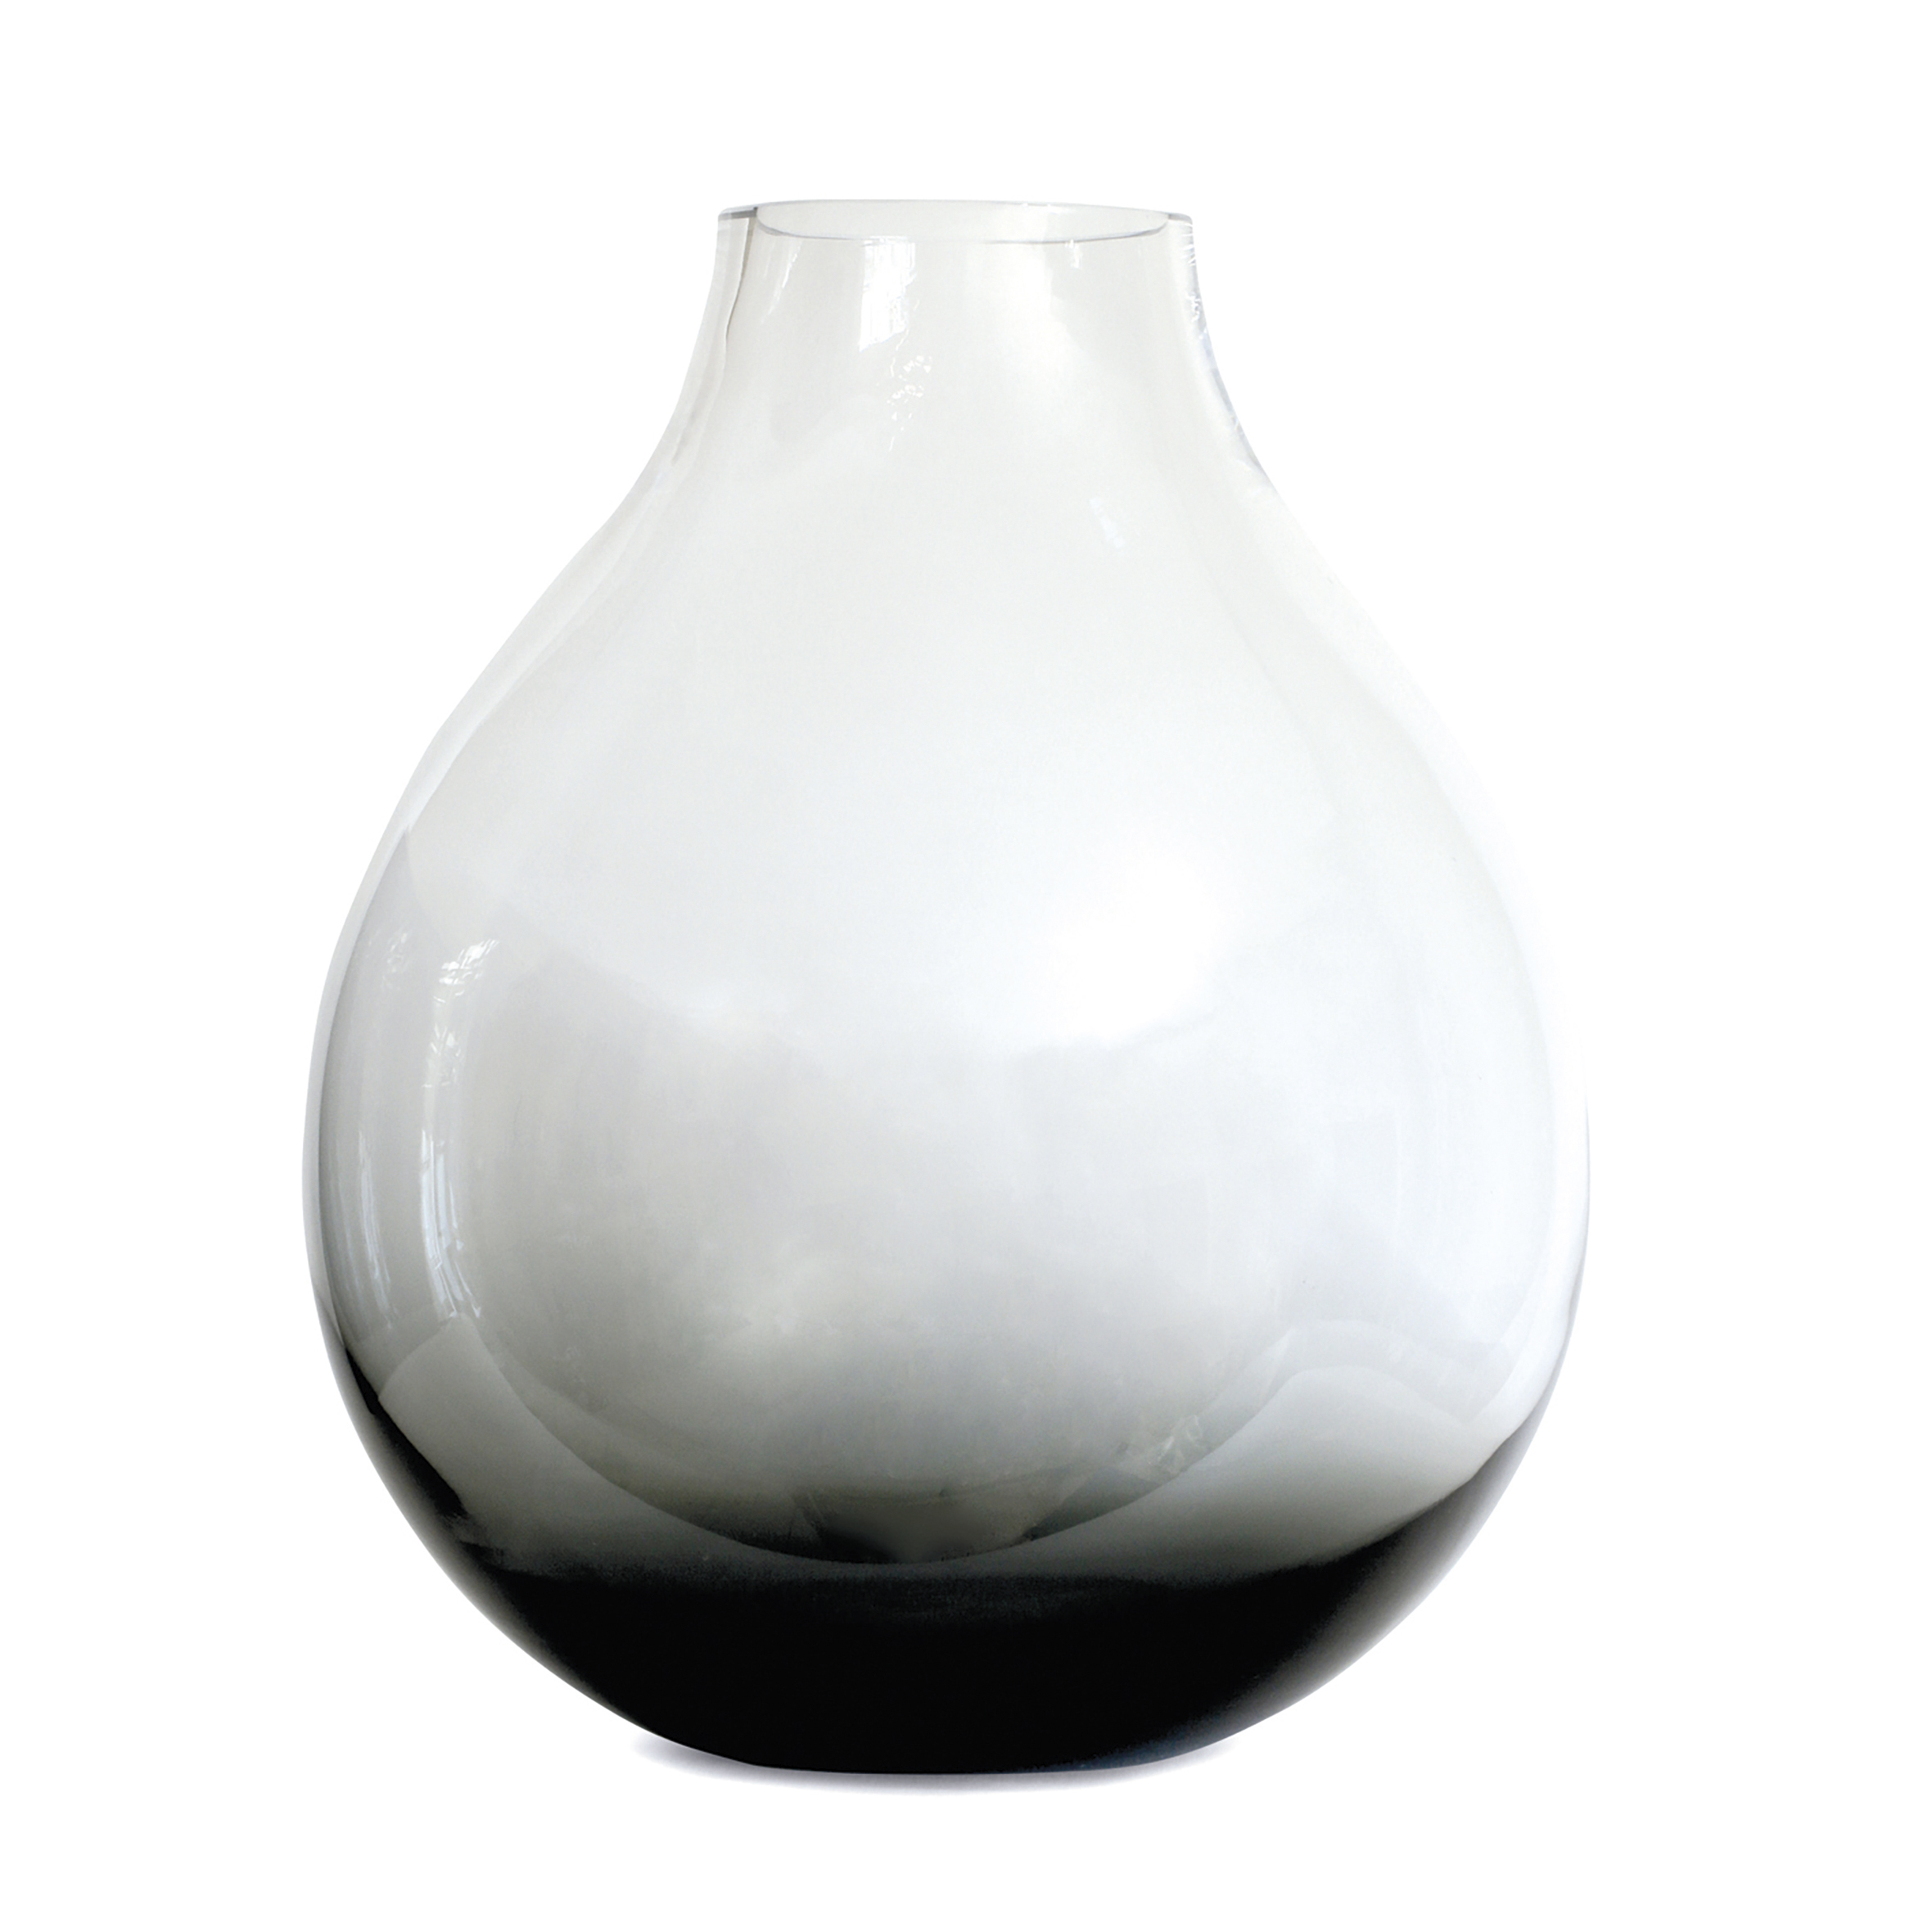 ro-collection Flower Vase No. 24